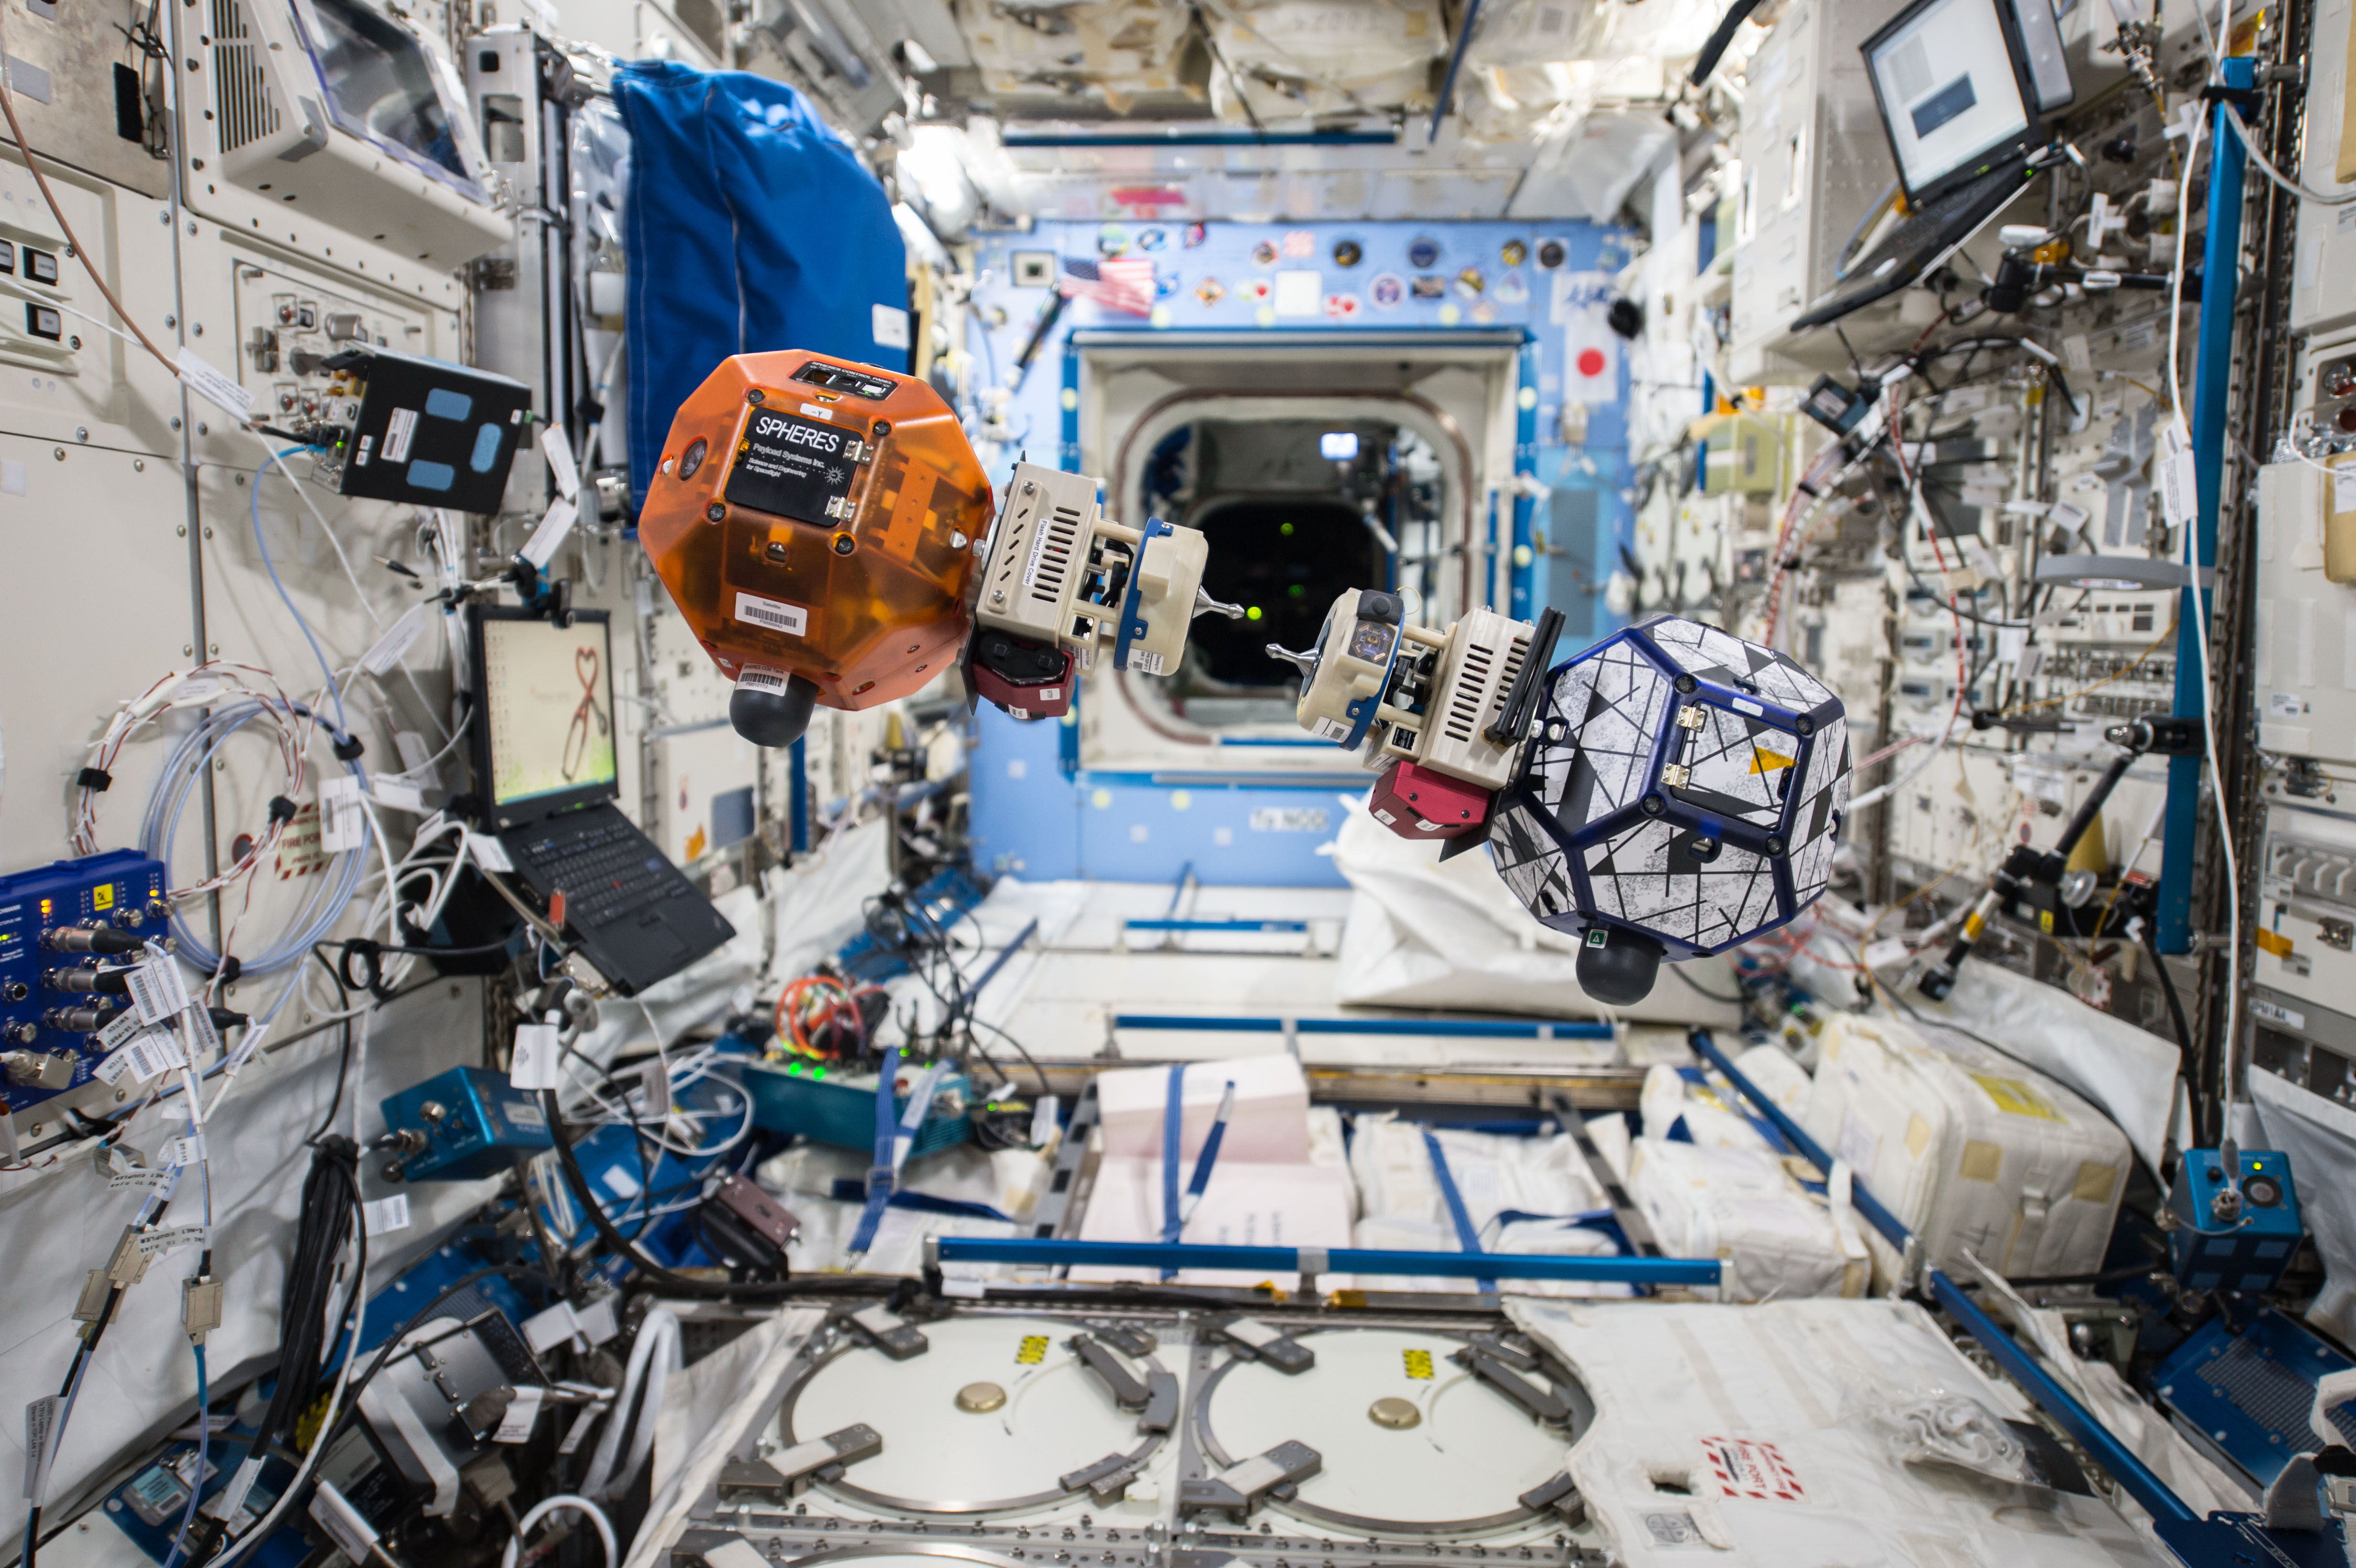 The latest in space science onboard the ISS